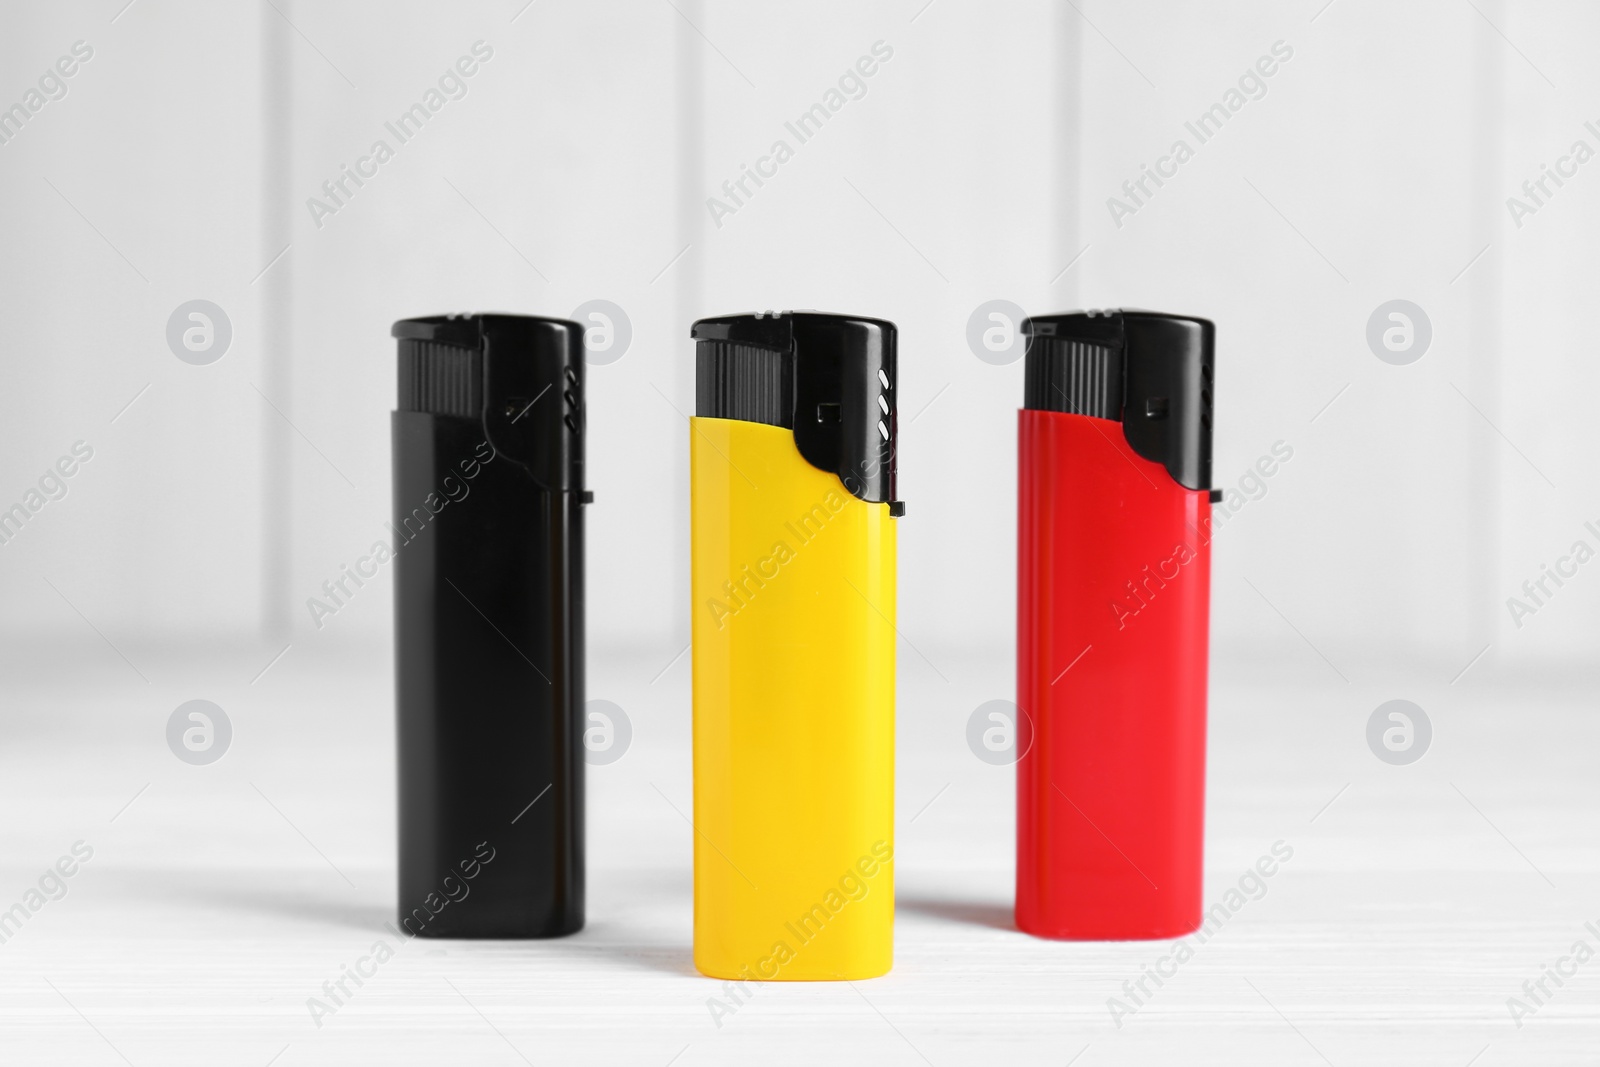 Photo of Stylish small pocket lighters on white wooden table